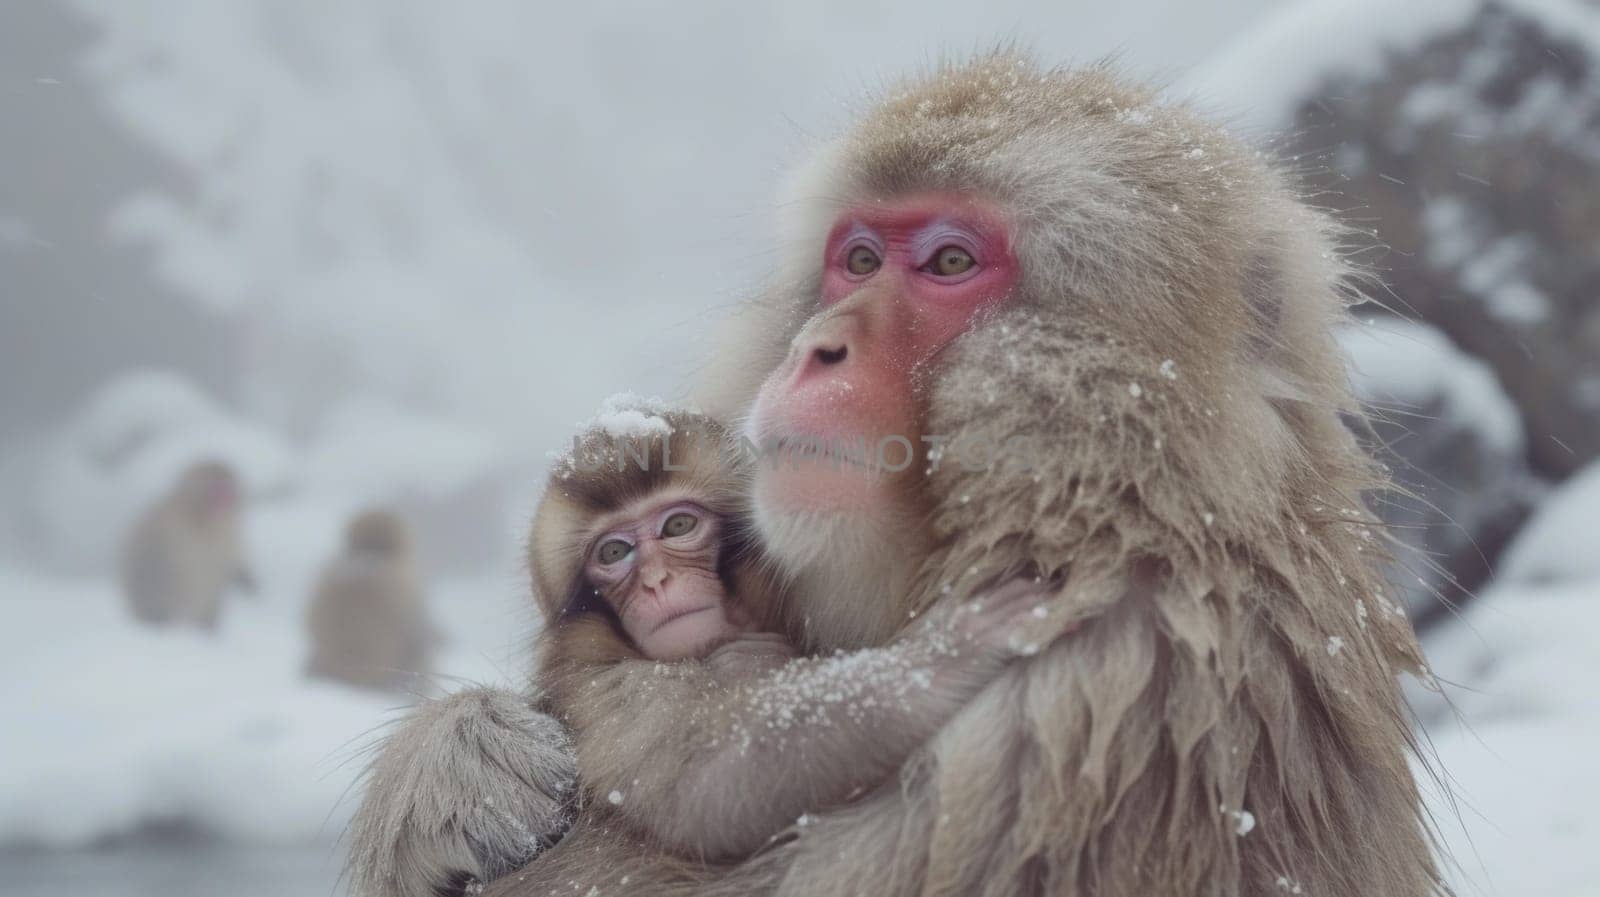 A monkey with a baby in its arms standing next to another